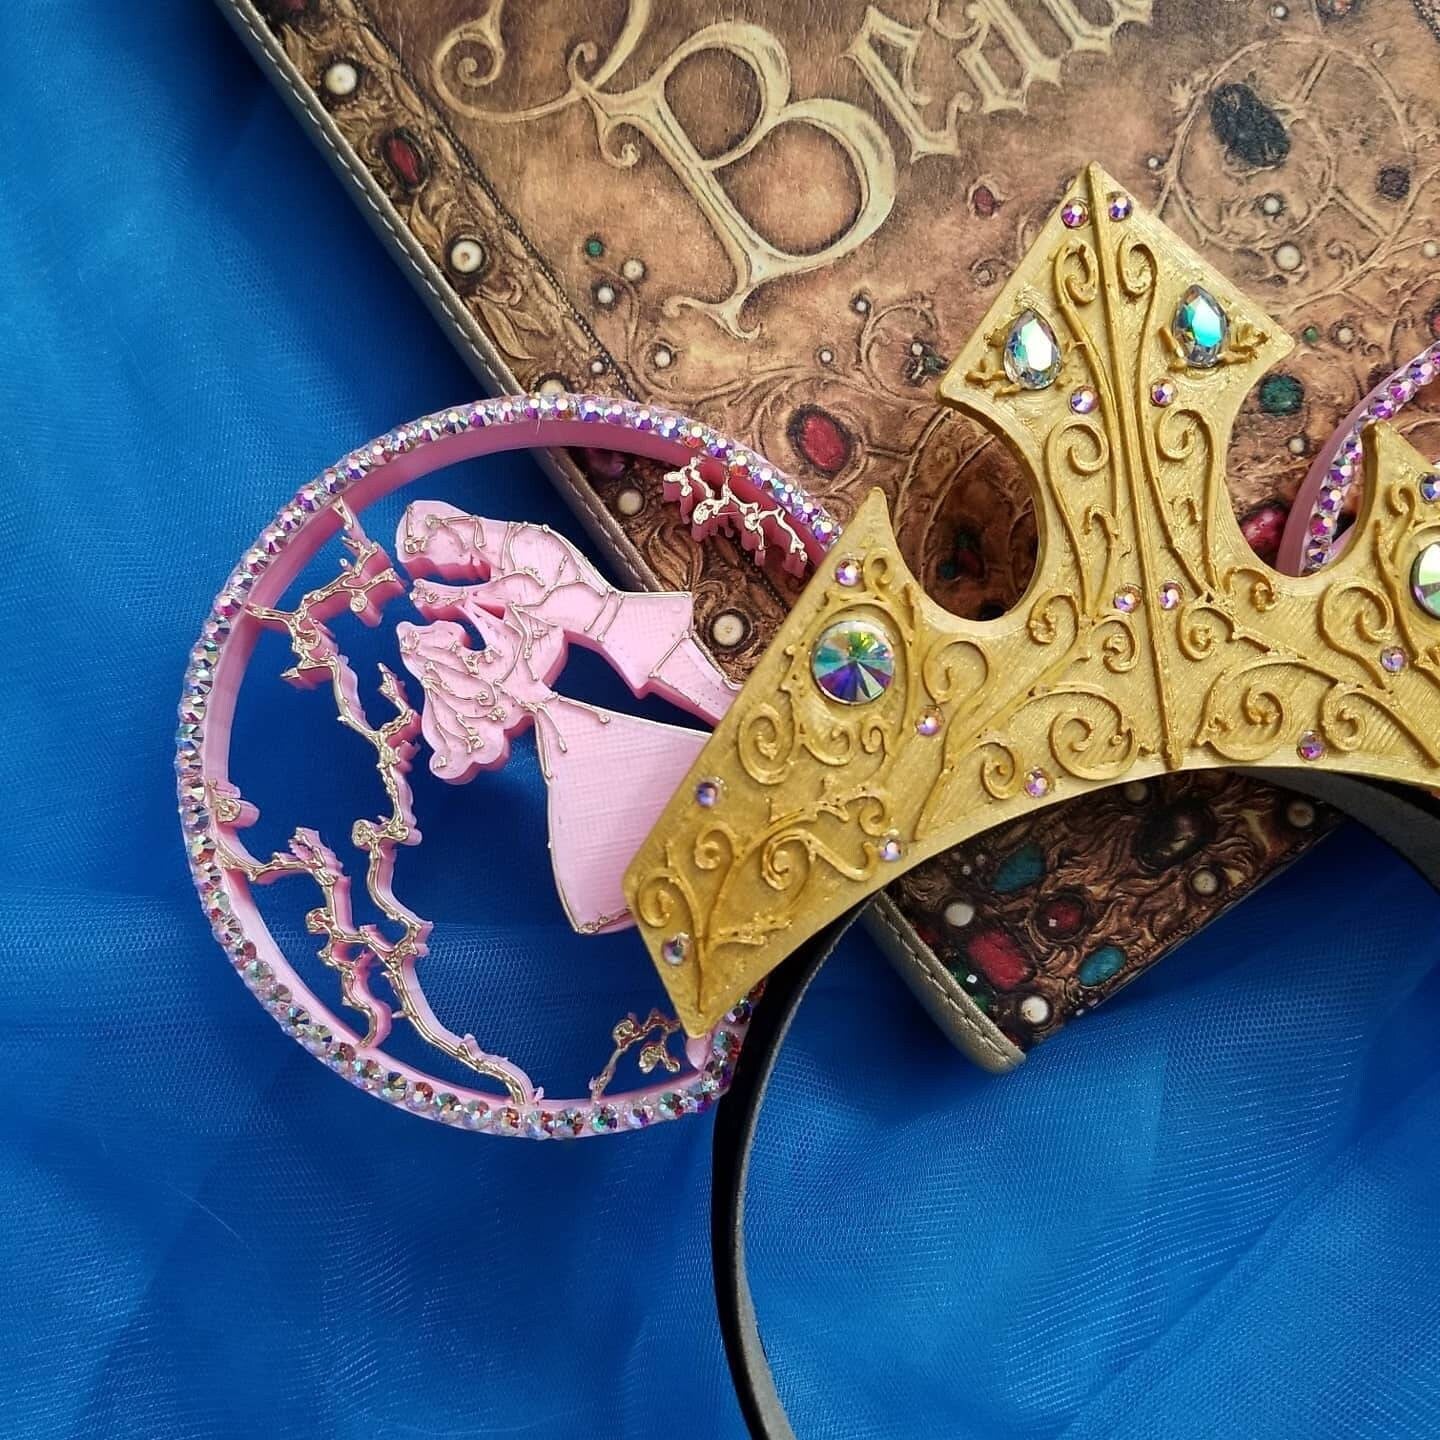 Once Upon a Dream with tiara , sleeping princess inspired, 3D print Mouse Ears